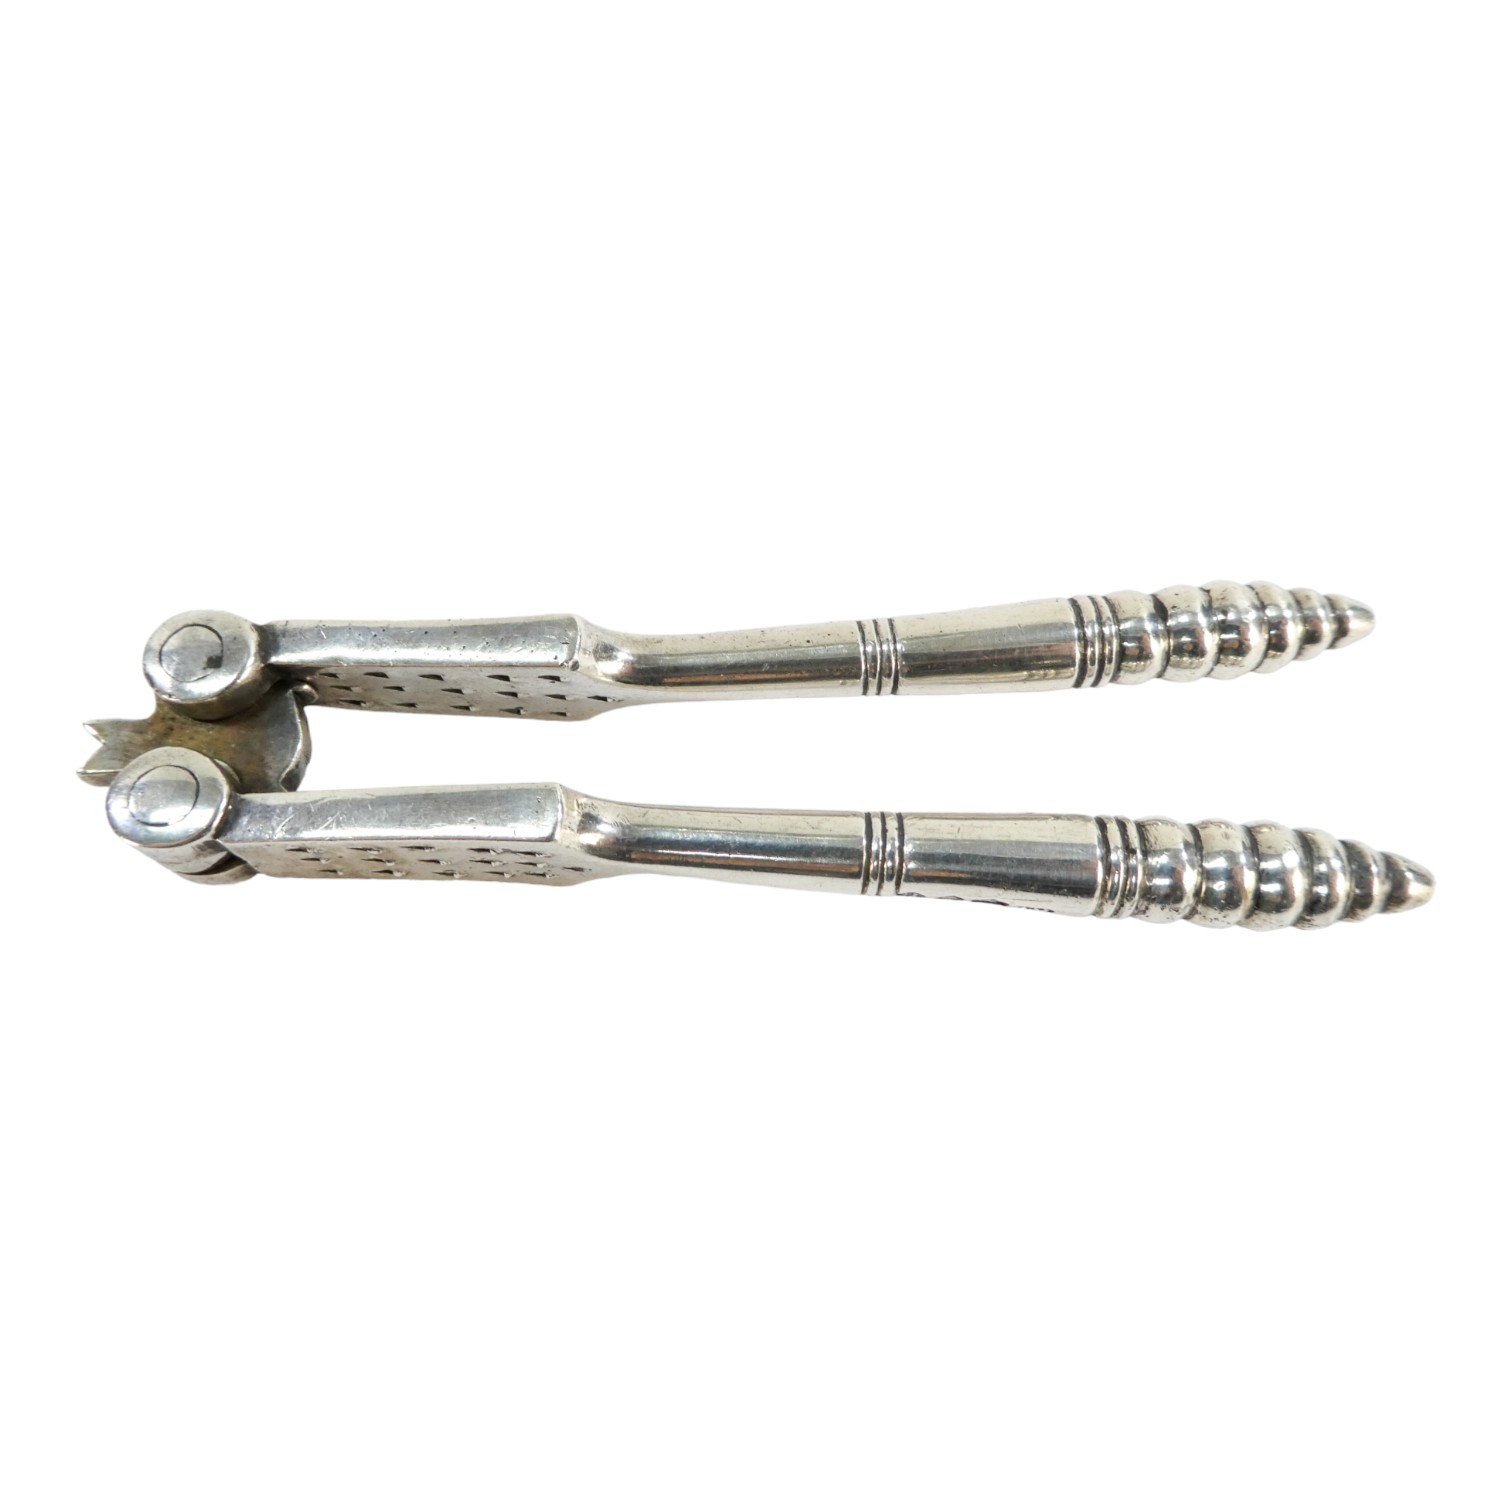 A pair of silver nut crackers - London 1892, Charles Boyton, with turned handles, weight 147g.